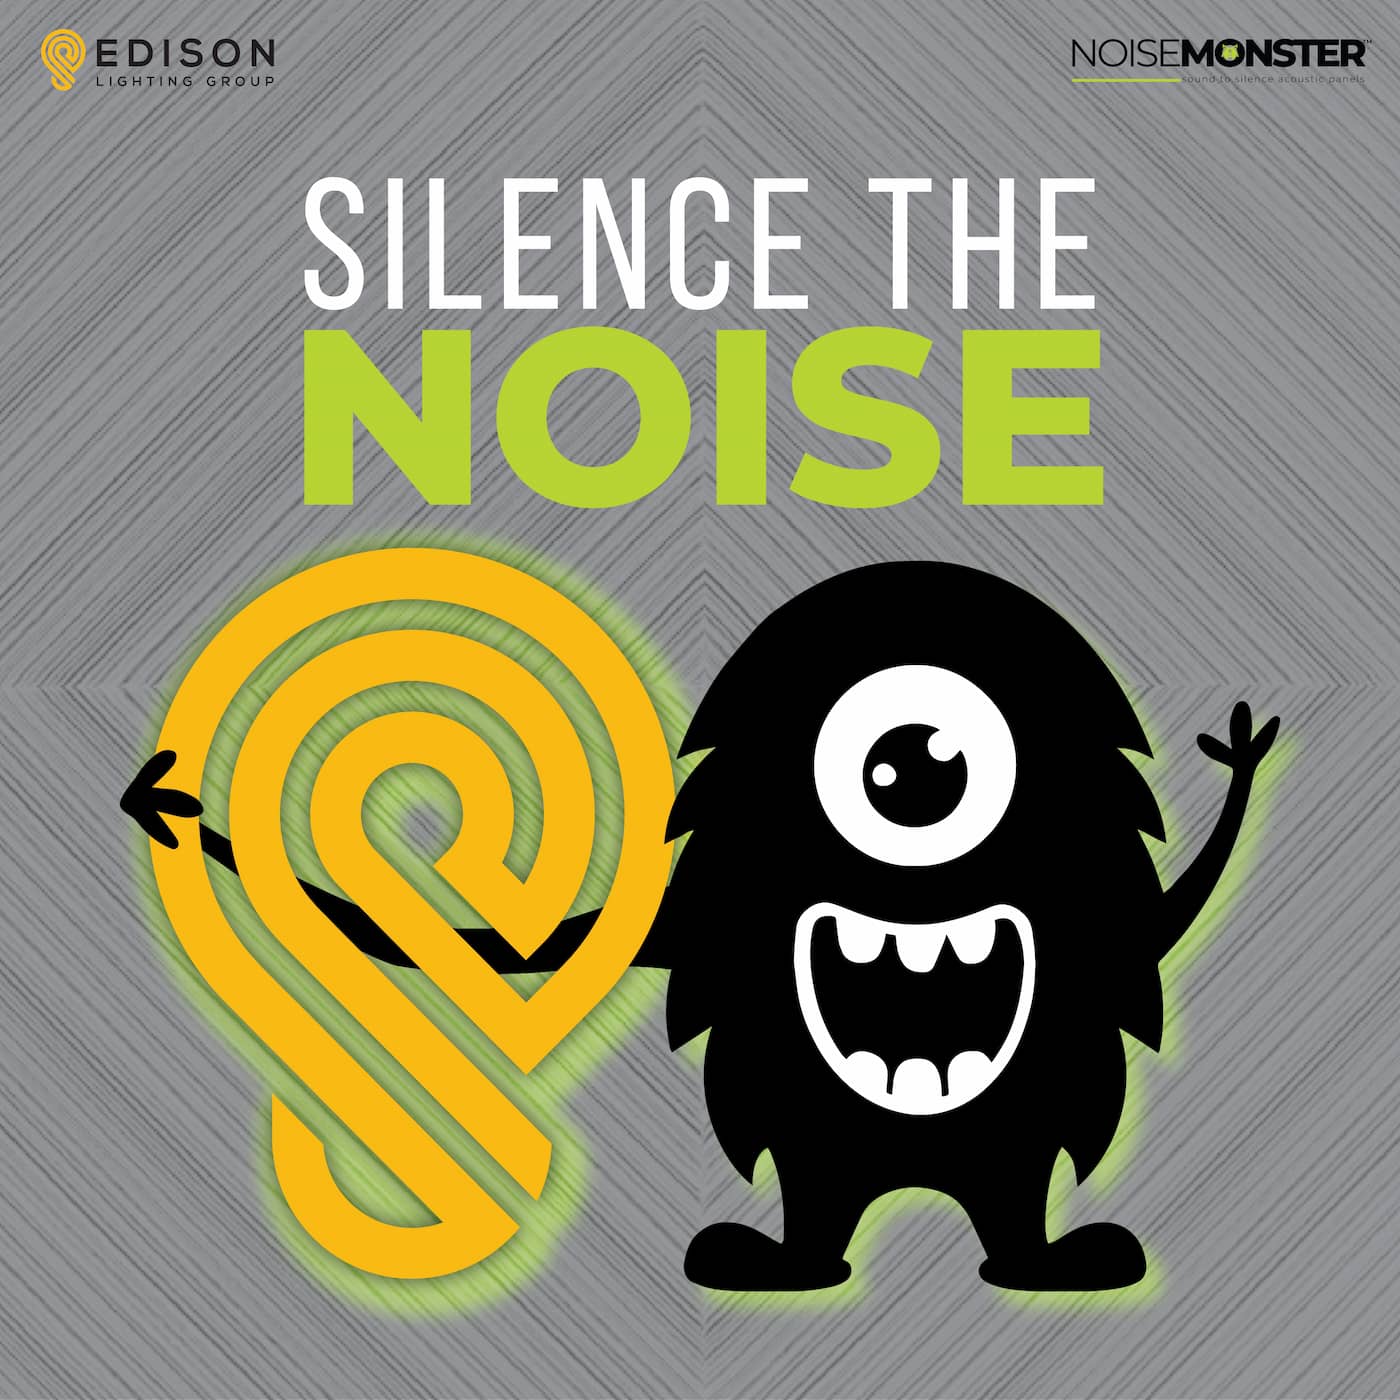 Noise Monster products are here.